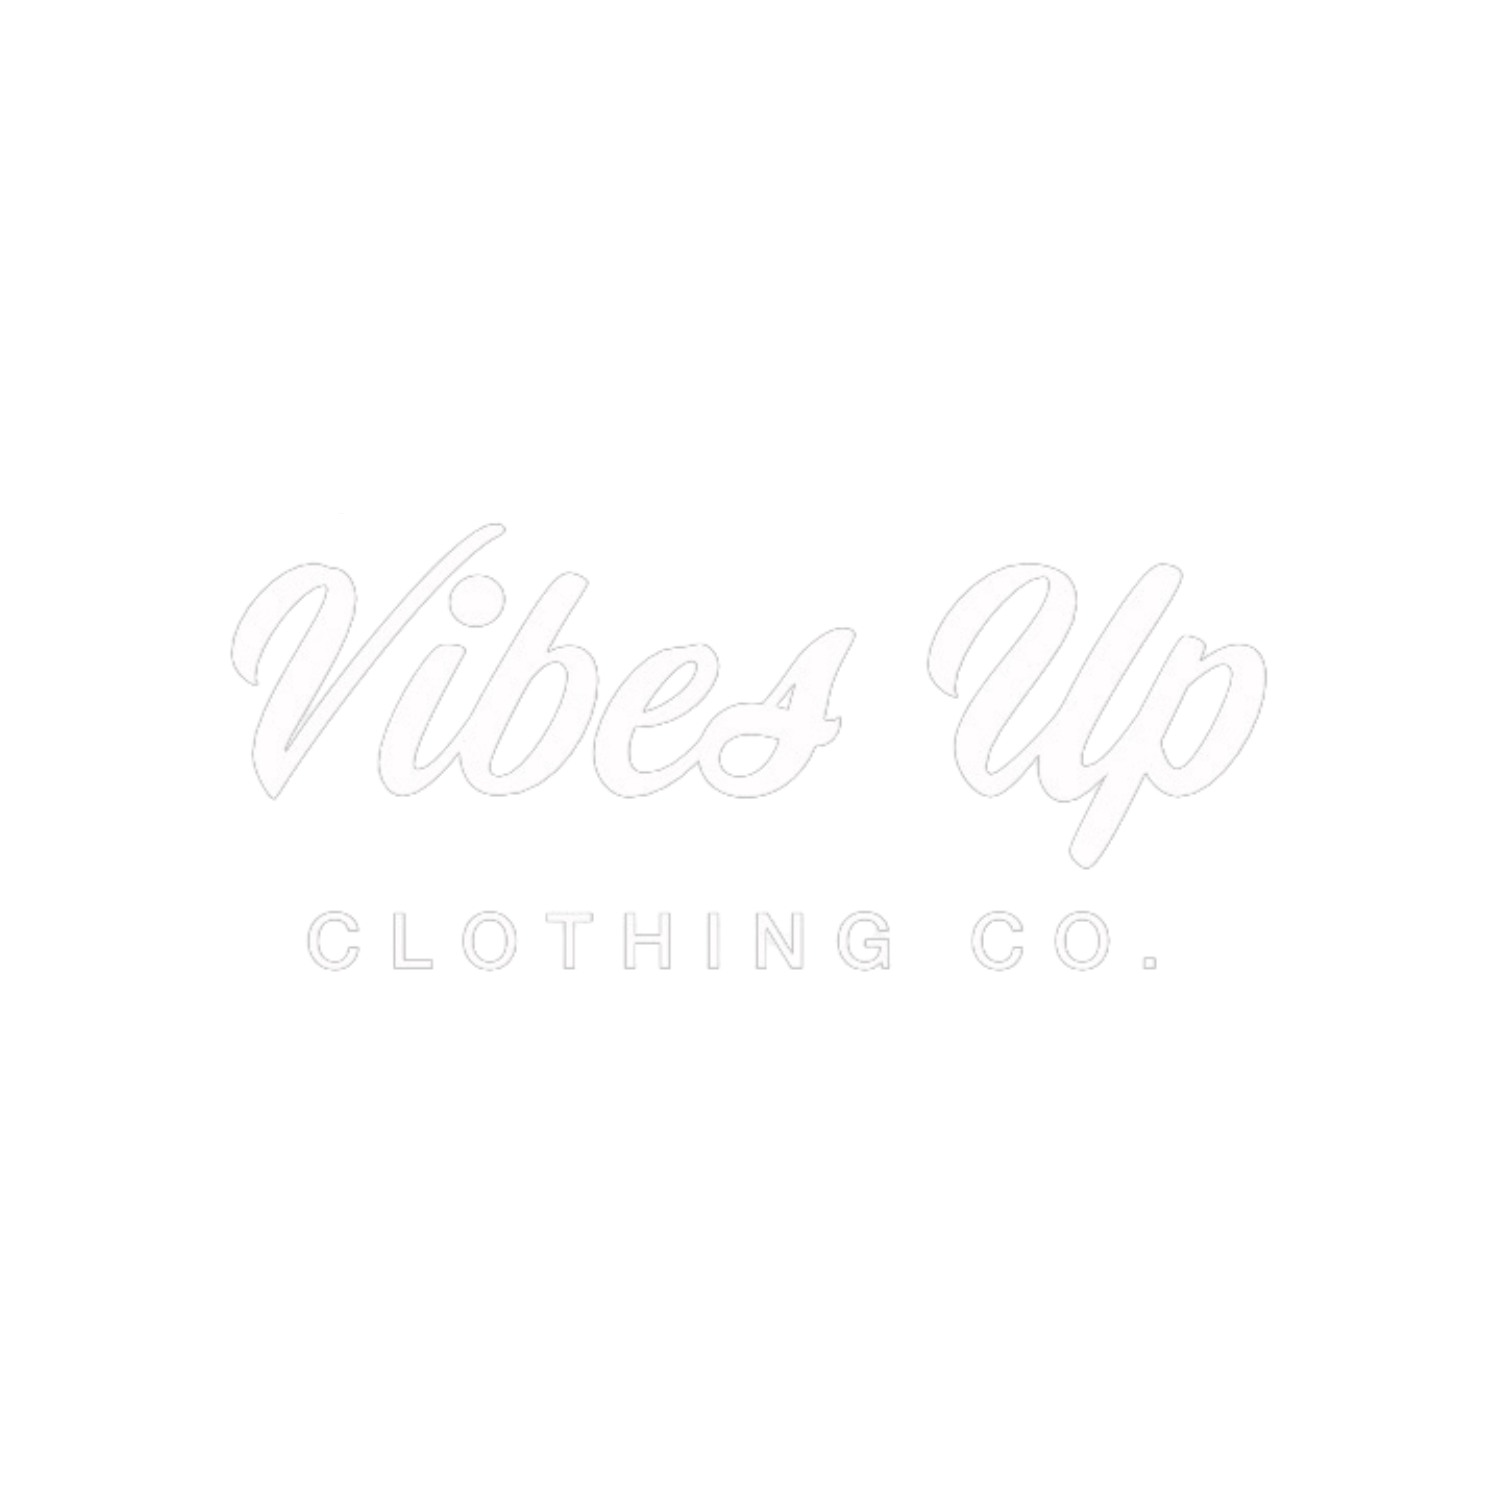 Vibes Up Clothing Co.